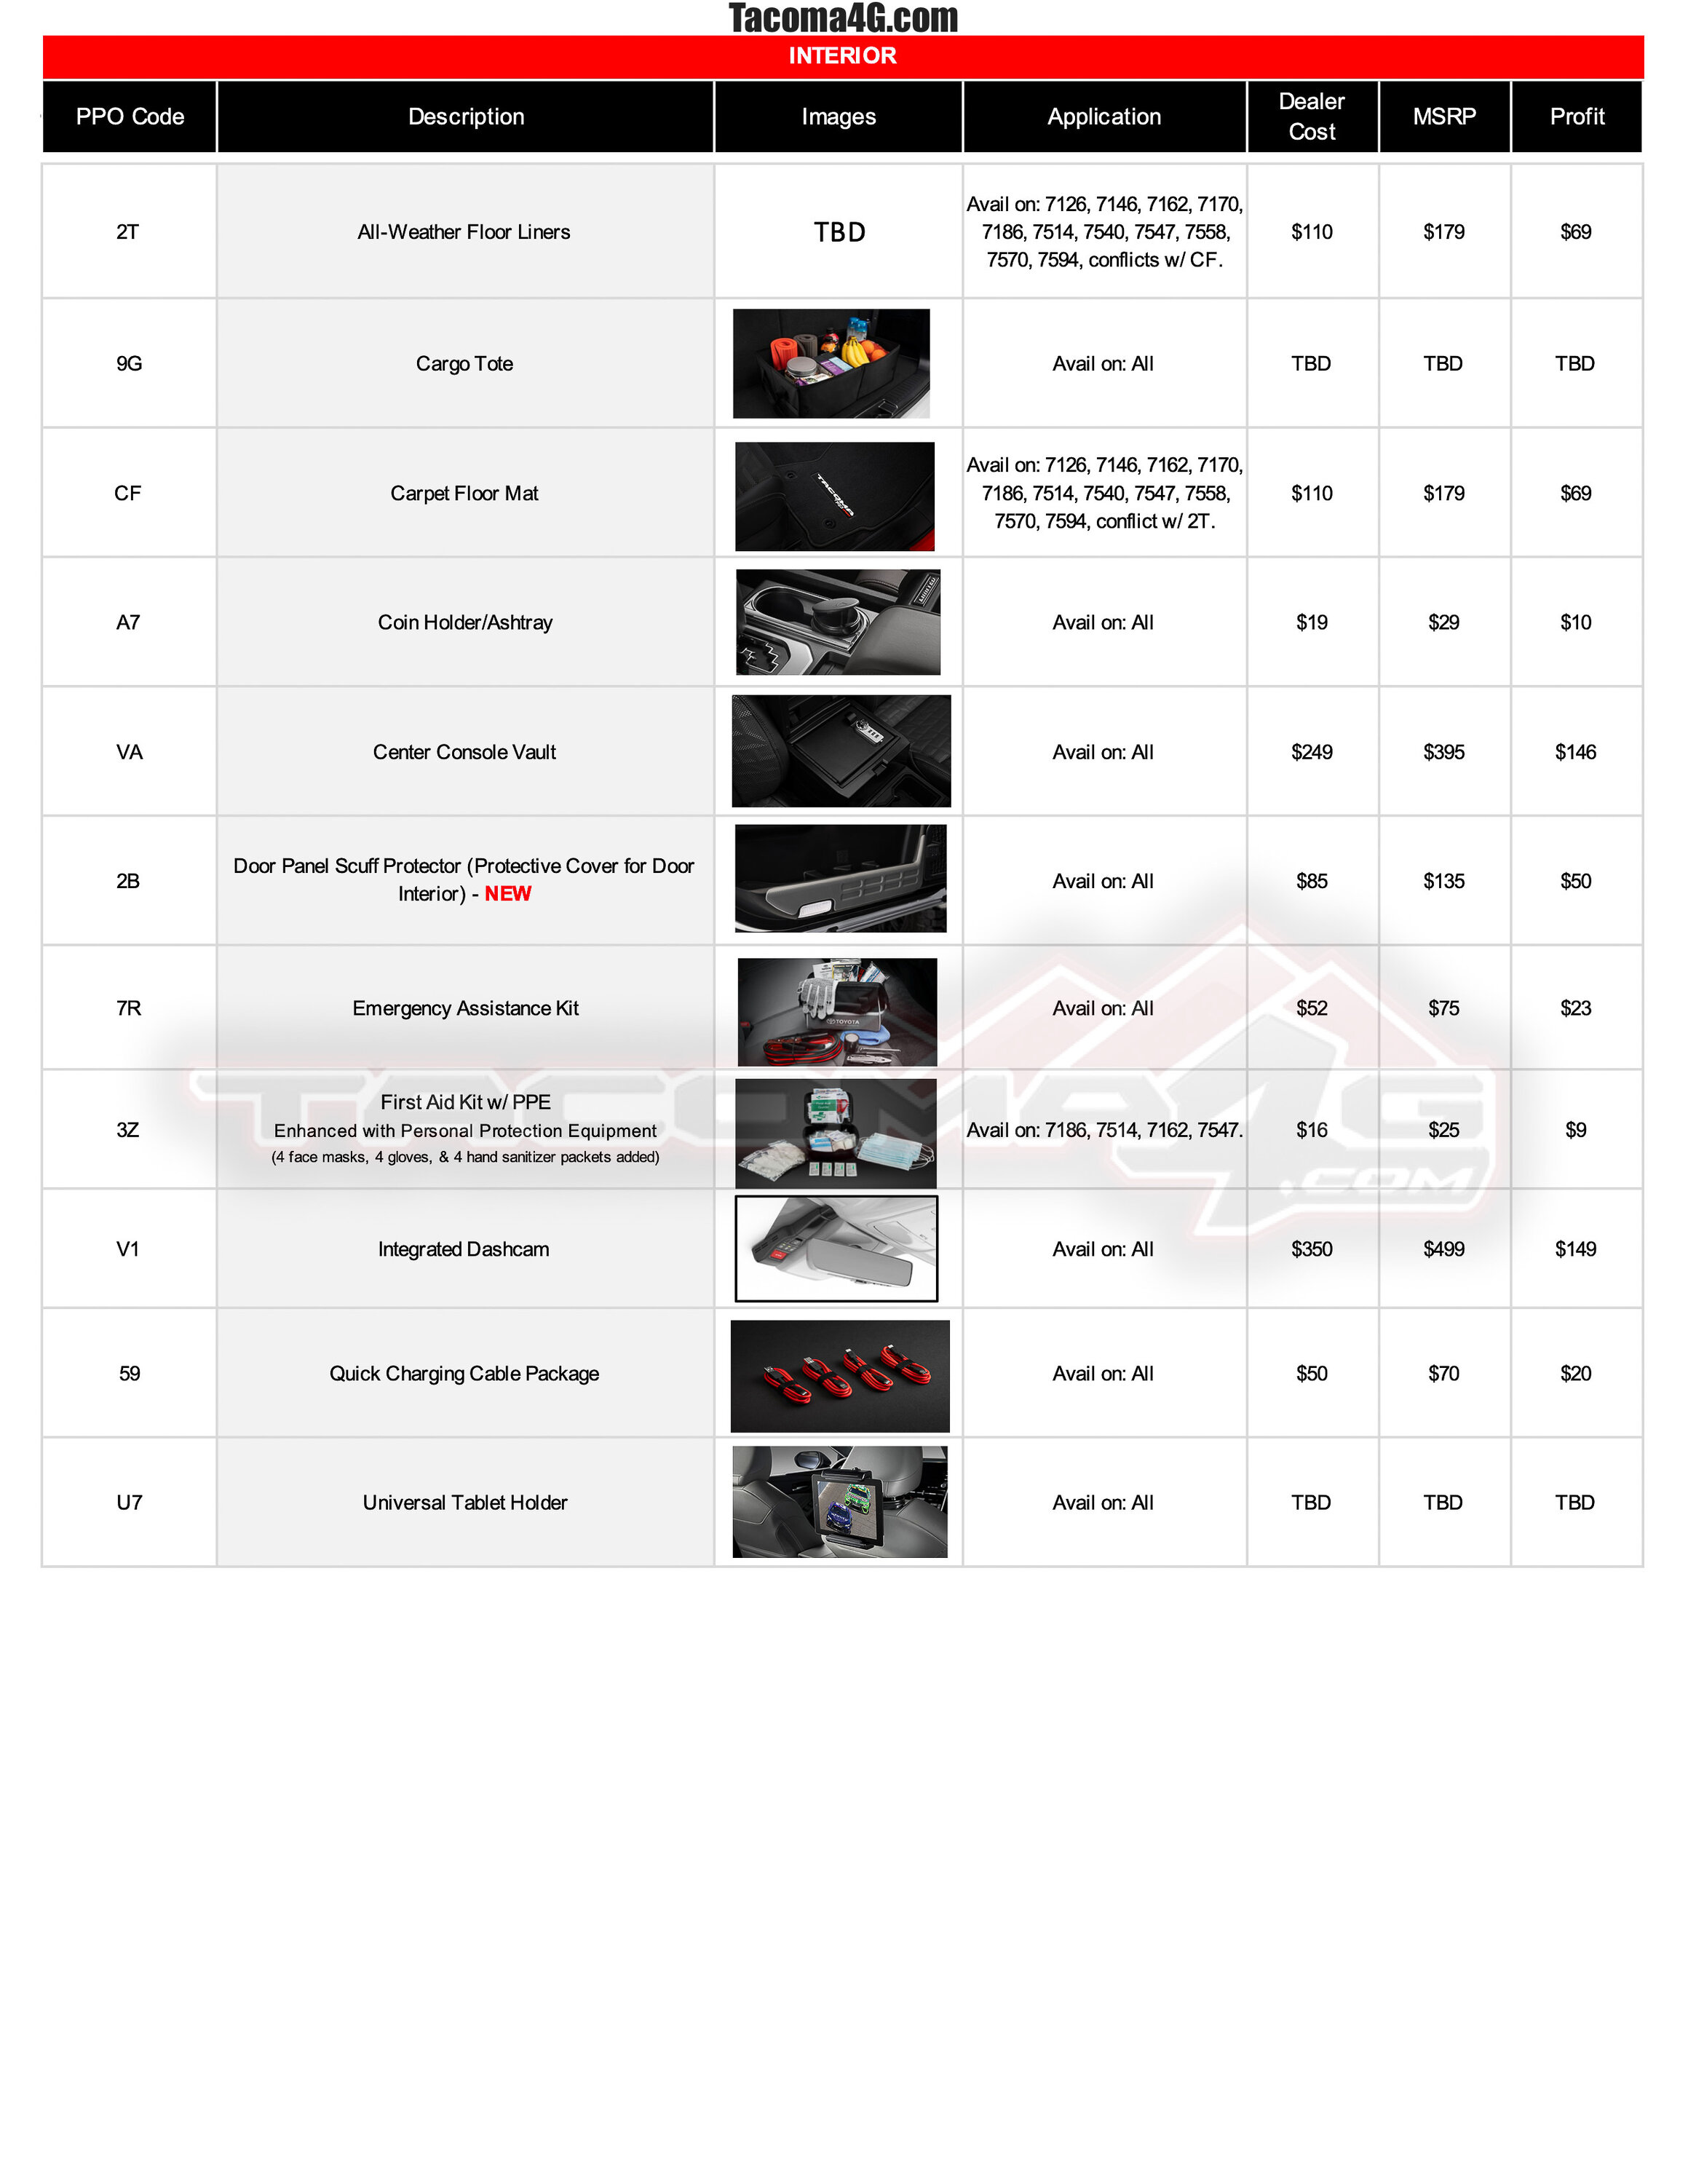 2024 Tacoma 2024 Tacoma Post-Production Options (PPO) Guide - OEM / TRD Accessories Parts + Pricing!  [UPDATED 5-7-24] 2024 Tacoma PPO Accessories Guide_02.09.24-5